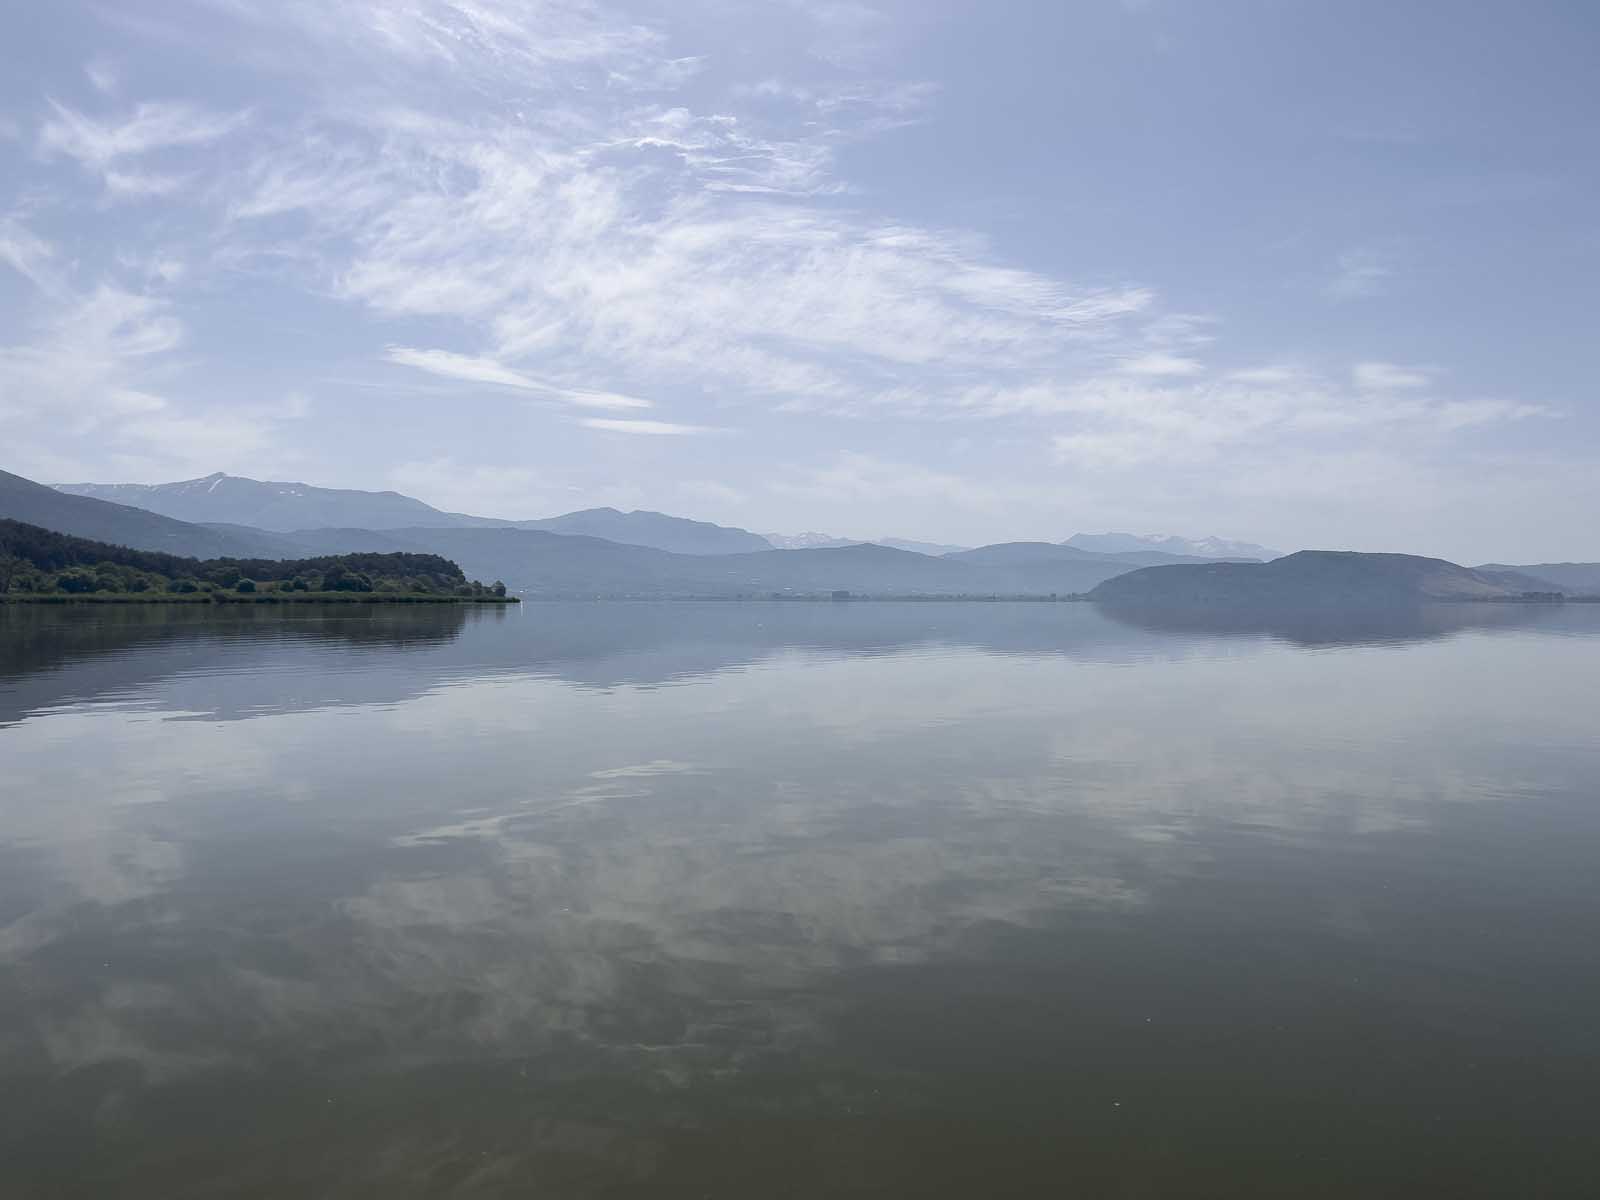 Things to do on Ioannina Island of the Lake